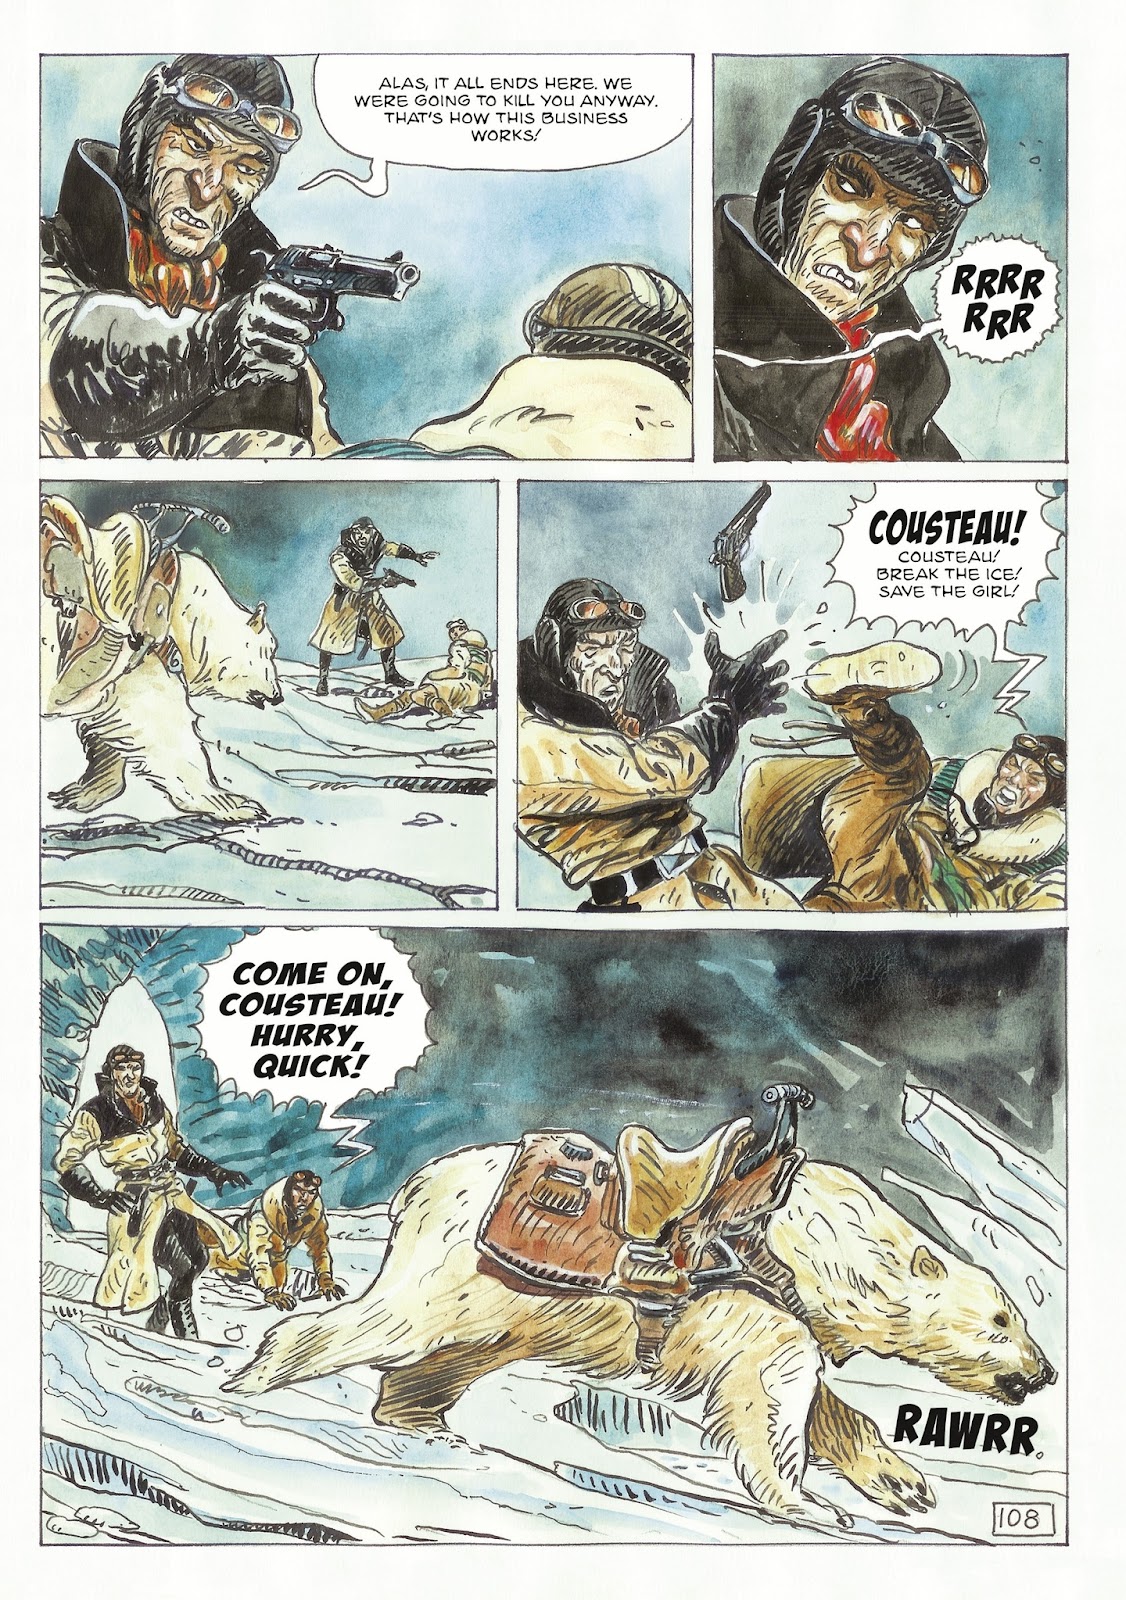 The Man With the Bear issue 2 - Page 54